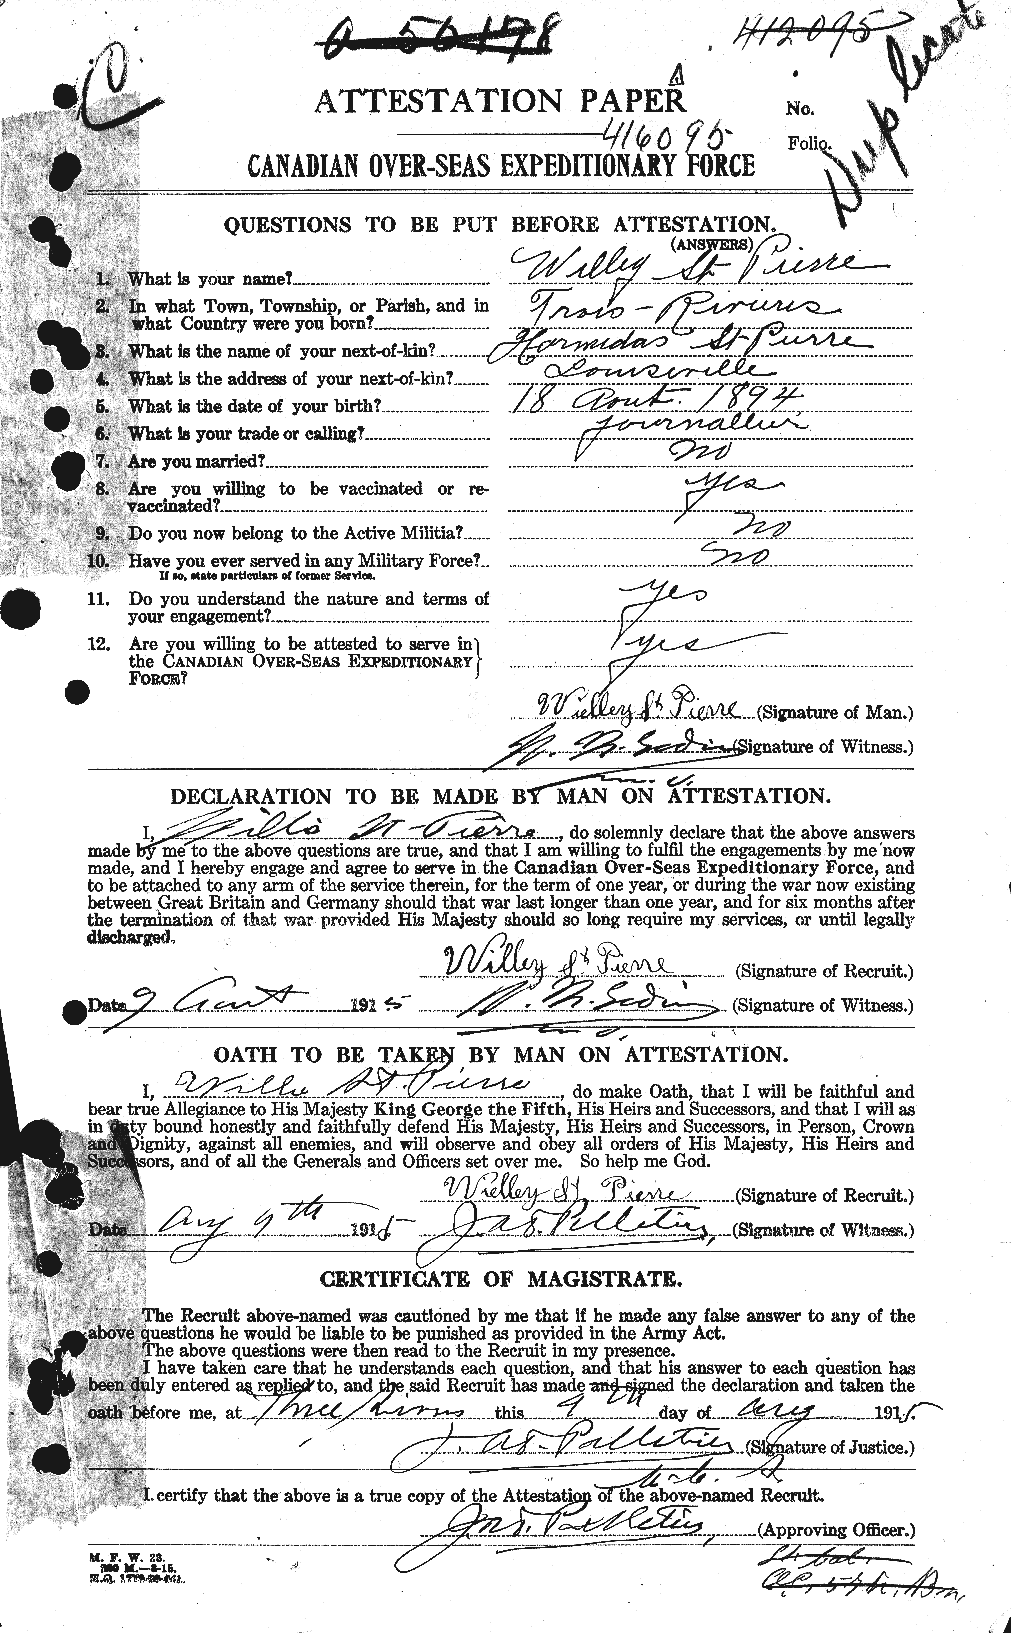 Personnel Records of the First World War - CEF 077488a